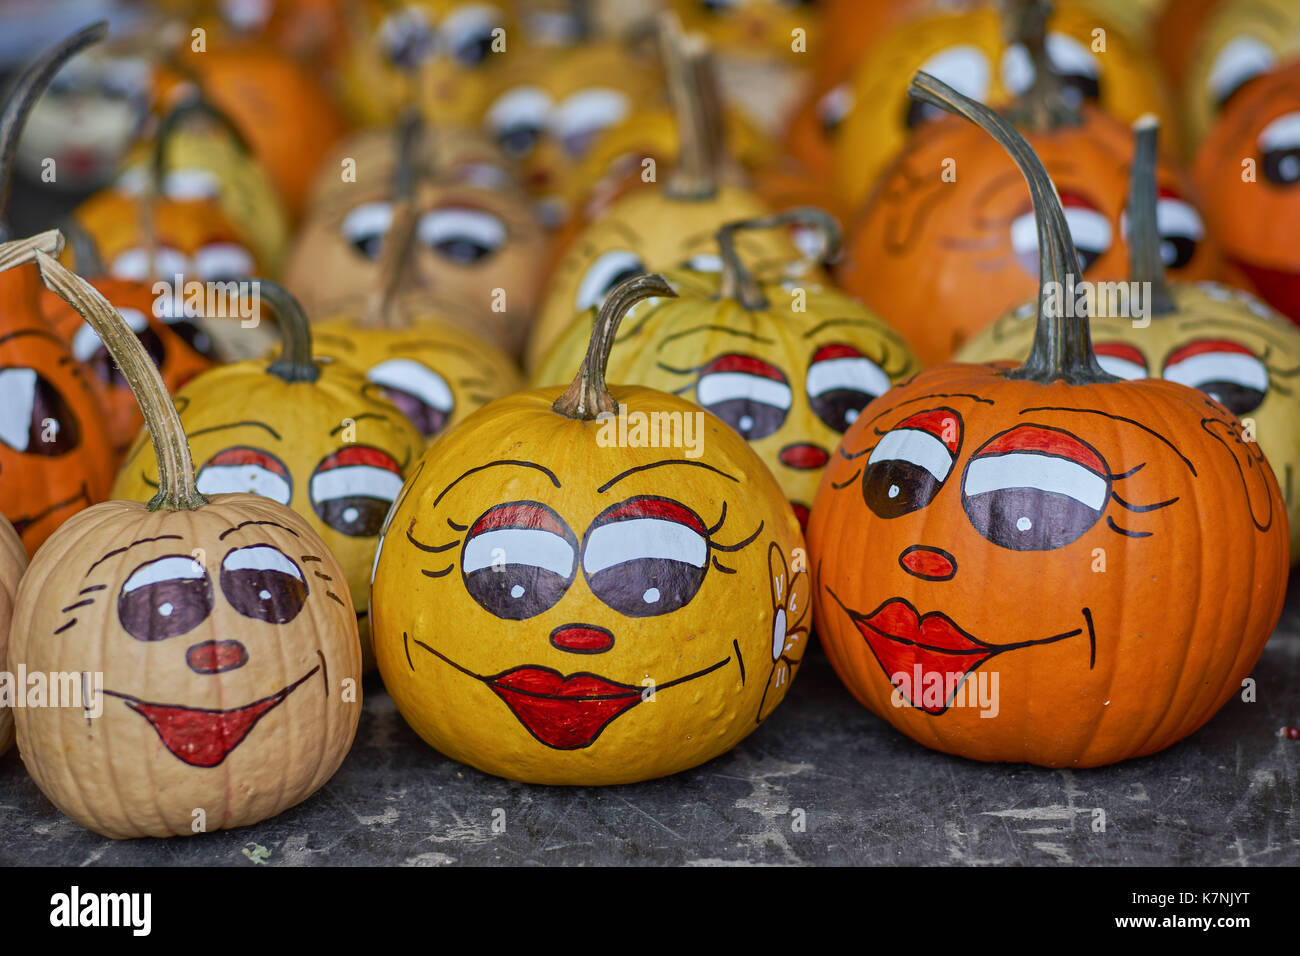 Smiling pumpkins Pumpkins with painted eyes lips nose and eyebrows many ...